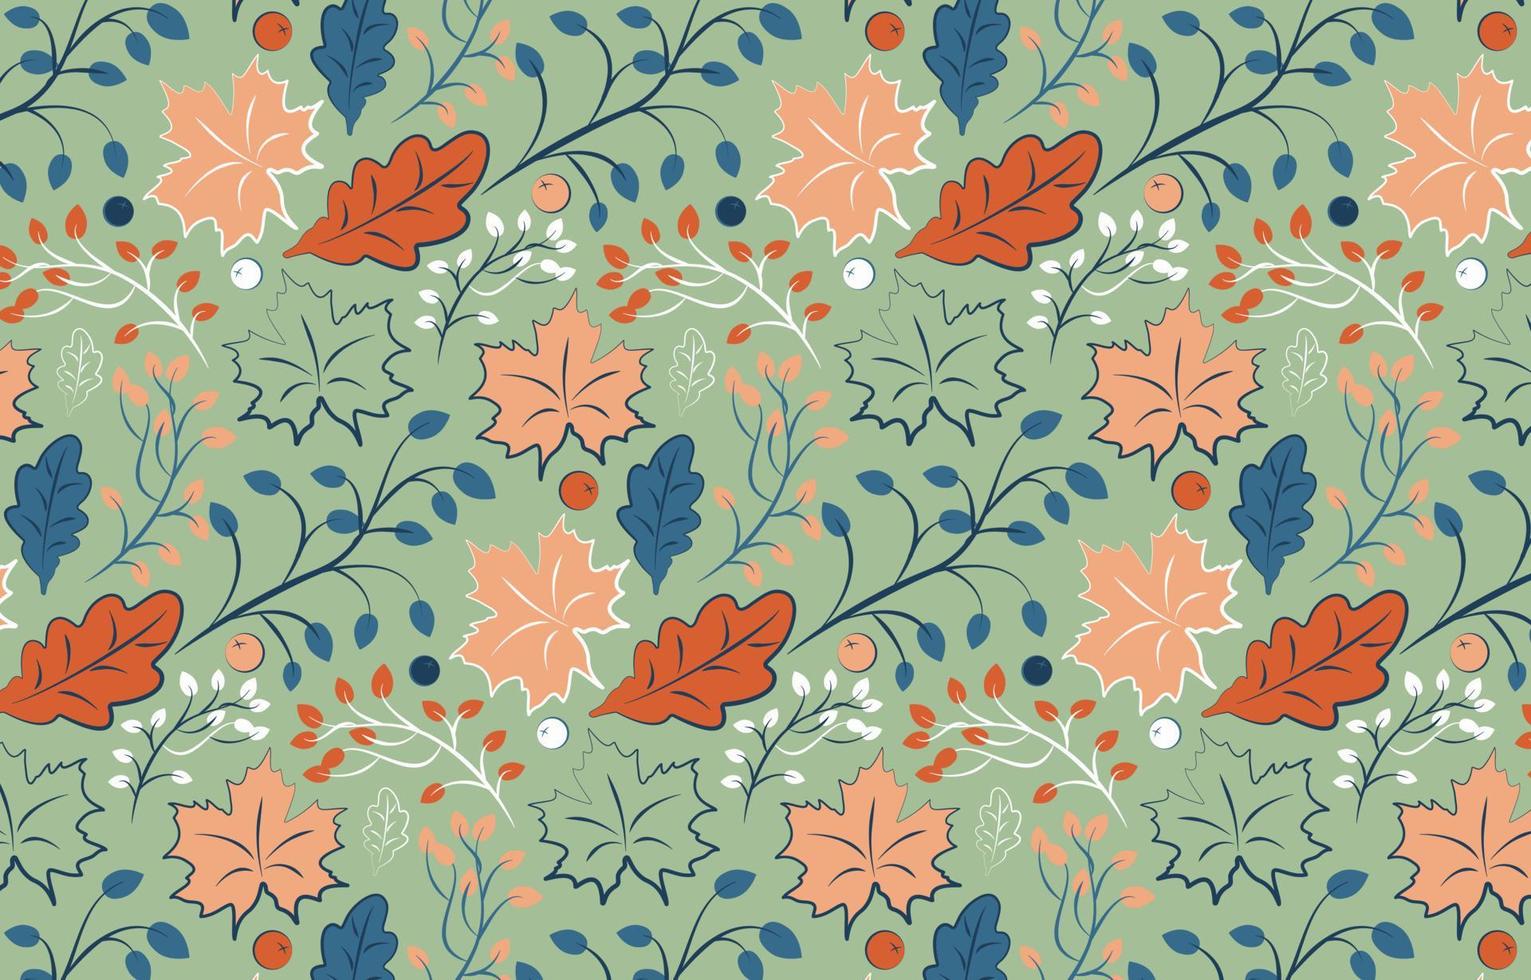 Beautiful autumn pattern in vintage style oak leaves, twigs and berries on a green background. Vector illustration